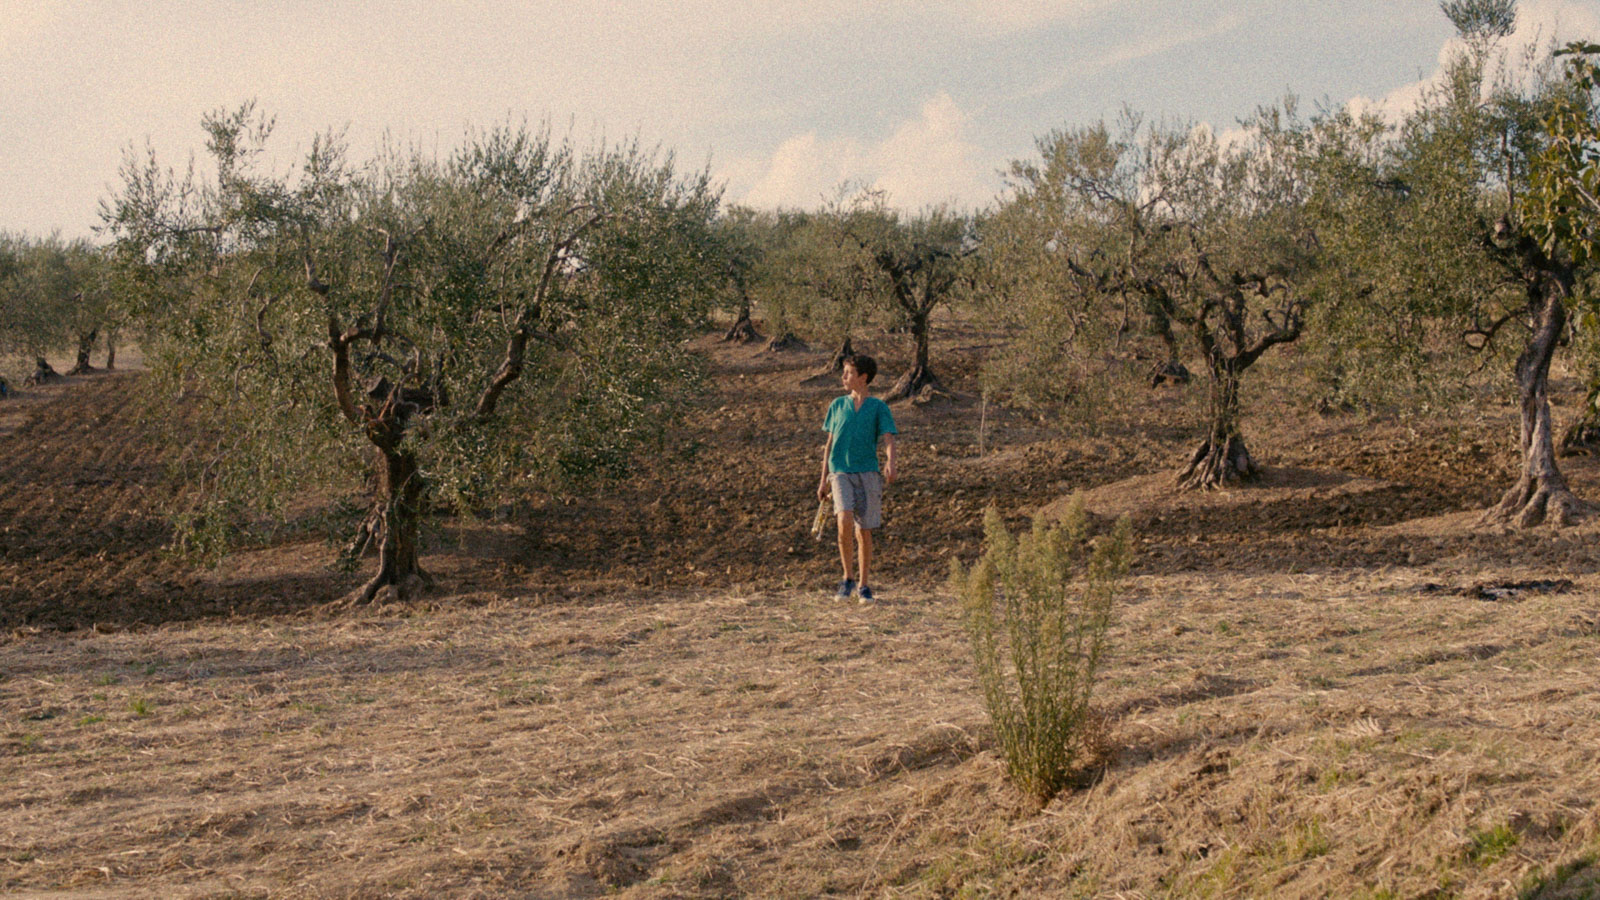 Gli ultimi a vederli vivere, The Last to See Them), Feature 80′, Cinematographer: Katharina Schelling, Director: Sara Summa, Production: German Film and Television Academy, 1:1,85 2K Arri Amira + Zeiss Ultra Prime Lenses, Berlinale Sektion Forum 2019, www.katharinaschelling.com